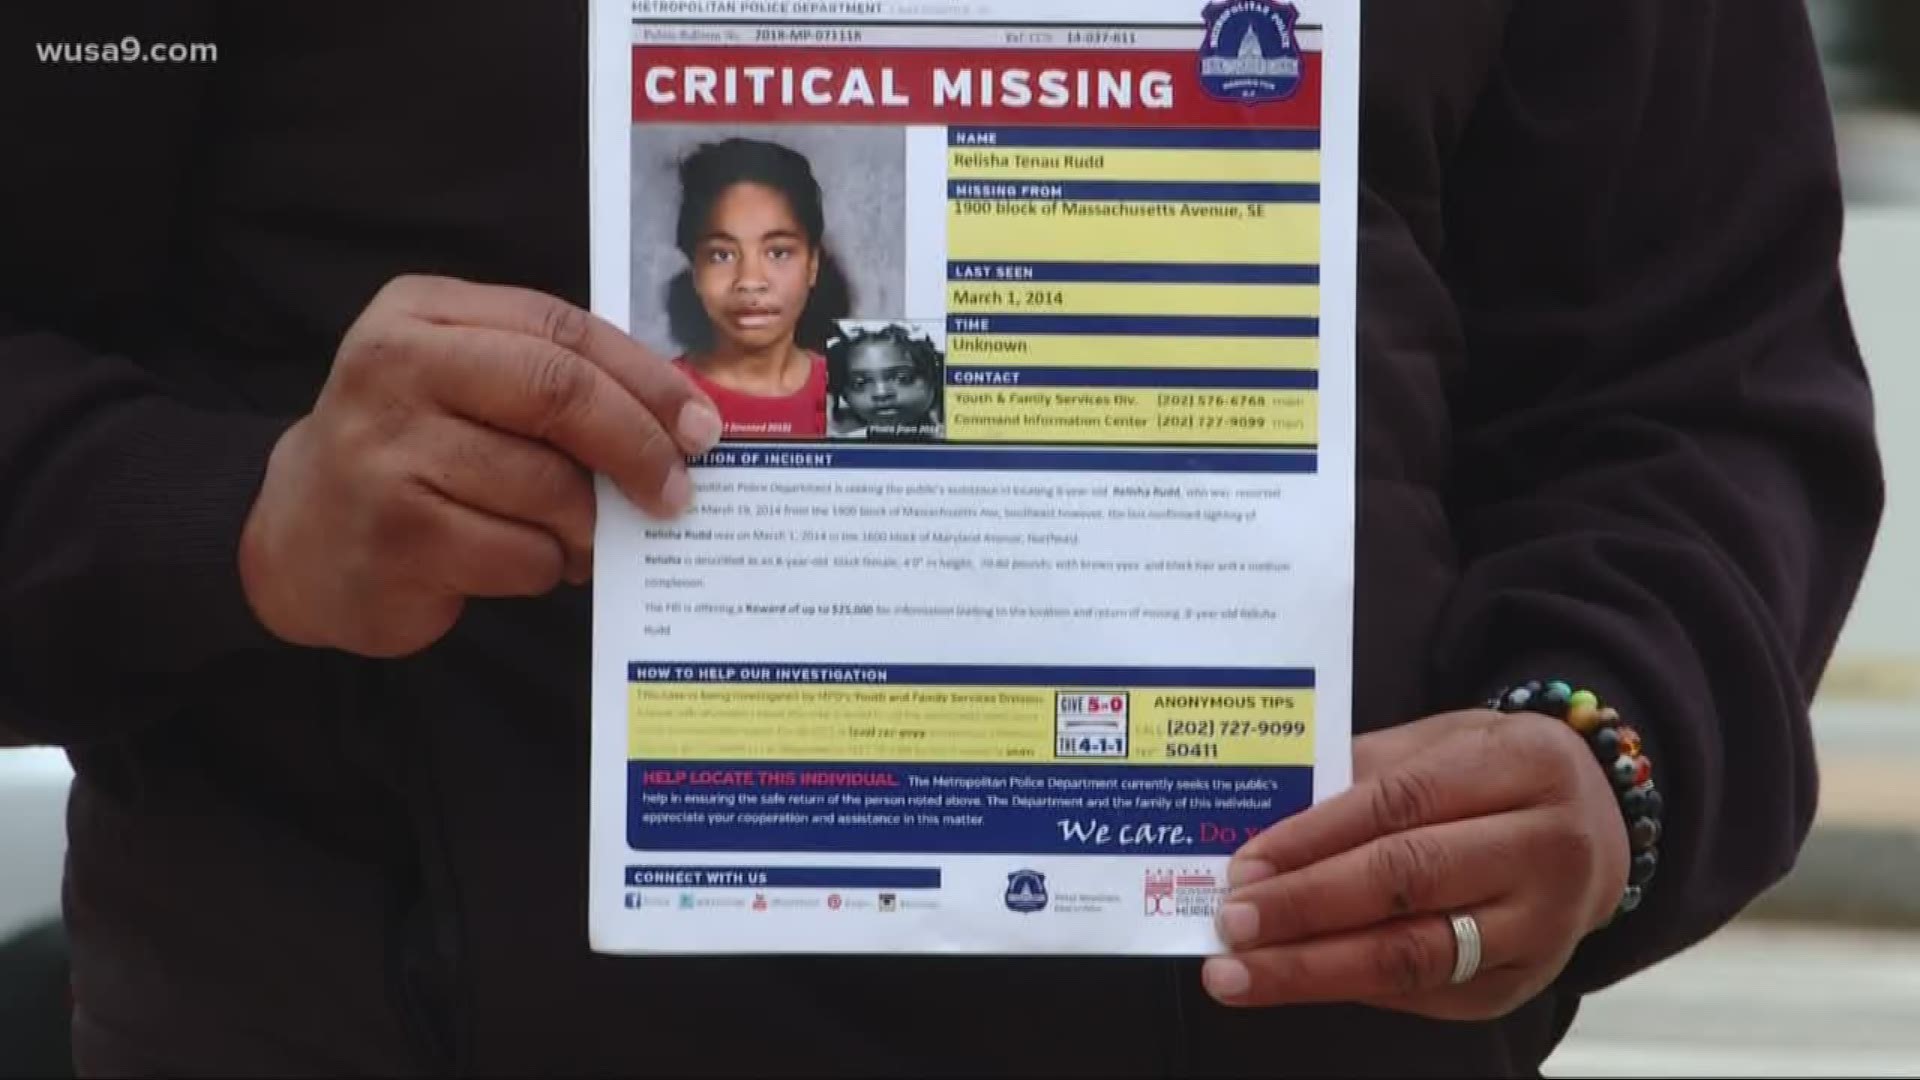 It's been five years since Relisha Rudd went missing.